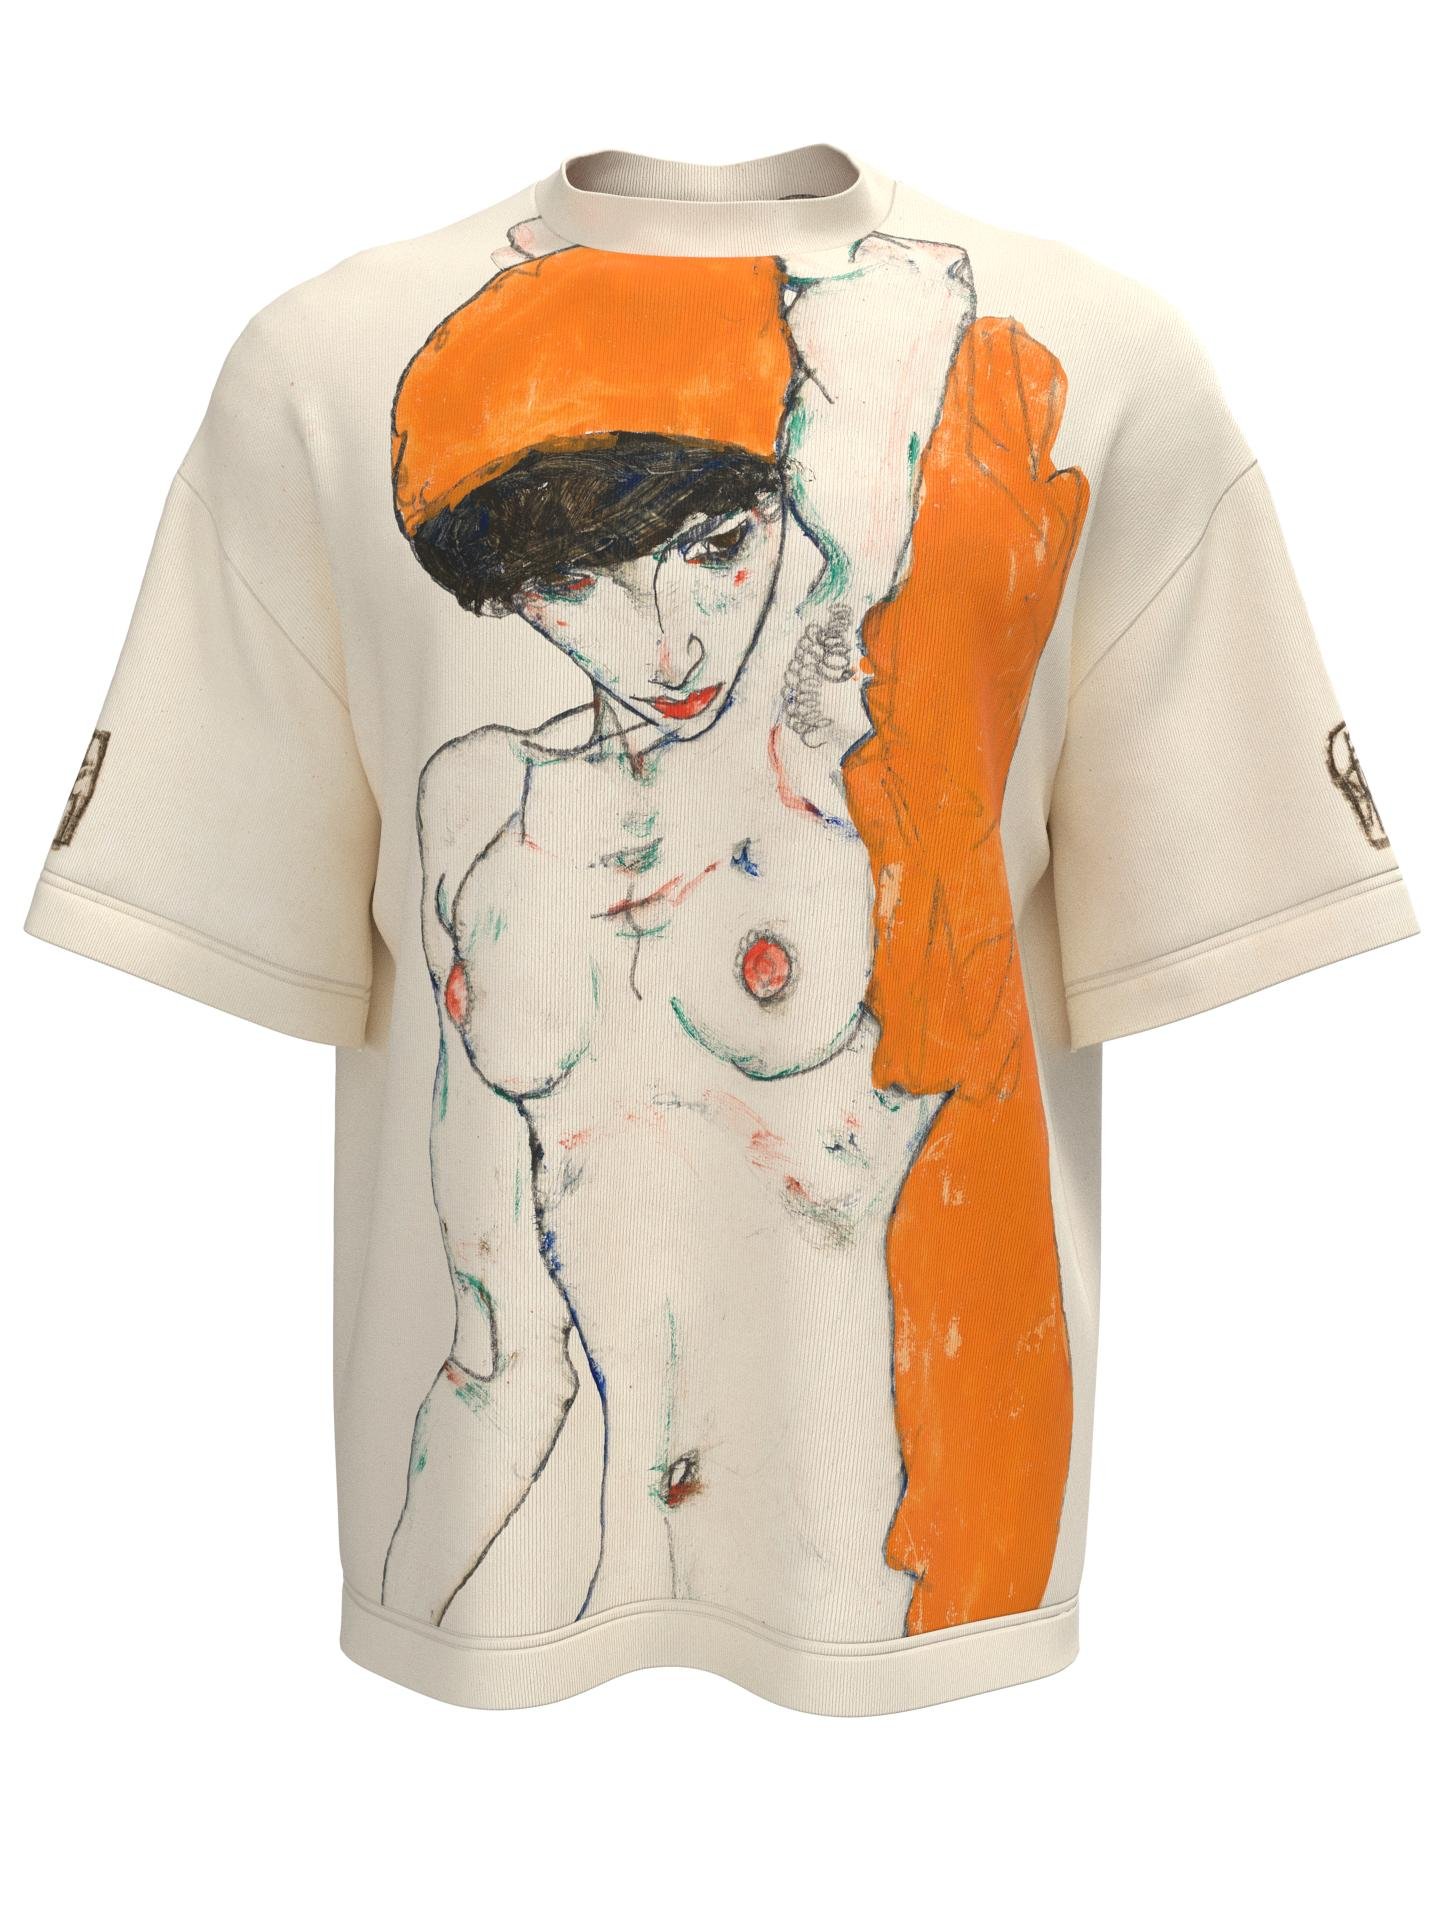 T-shirt - Standing Nude with Orange Drapery by DRESSX